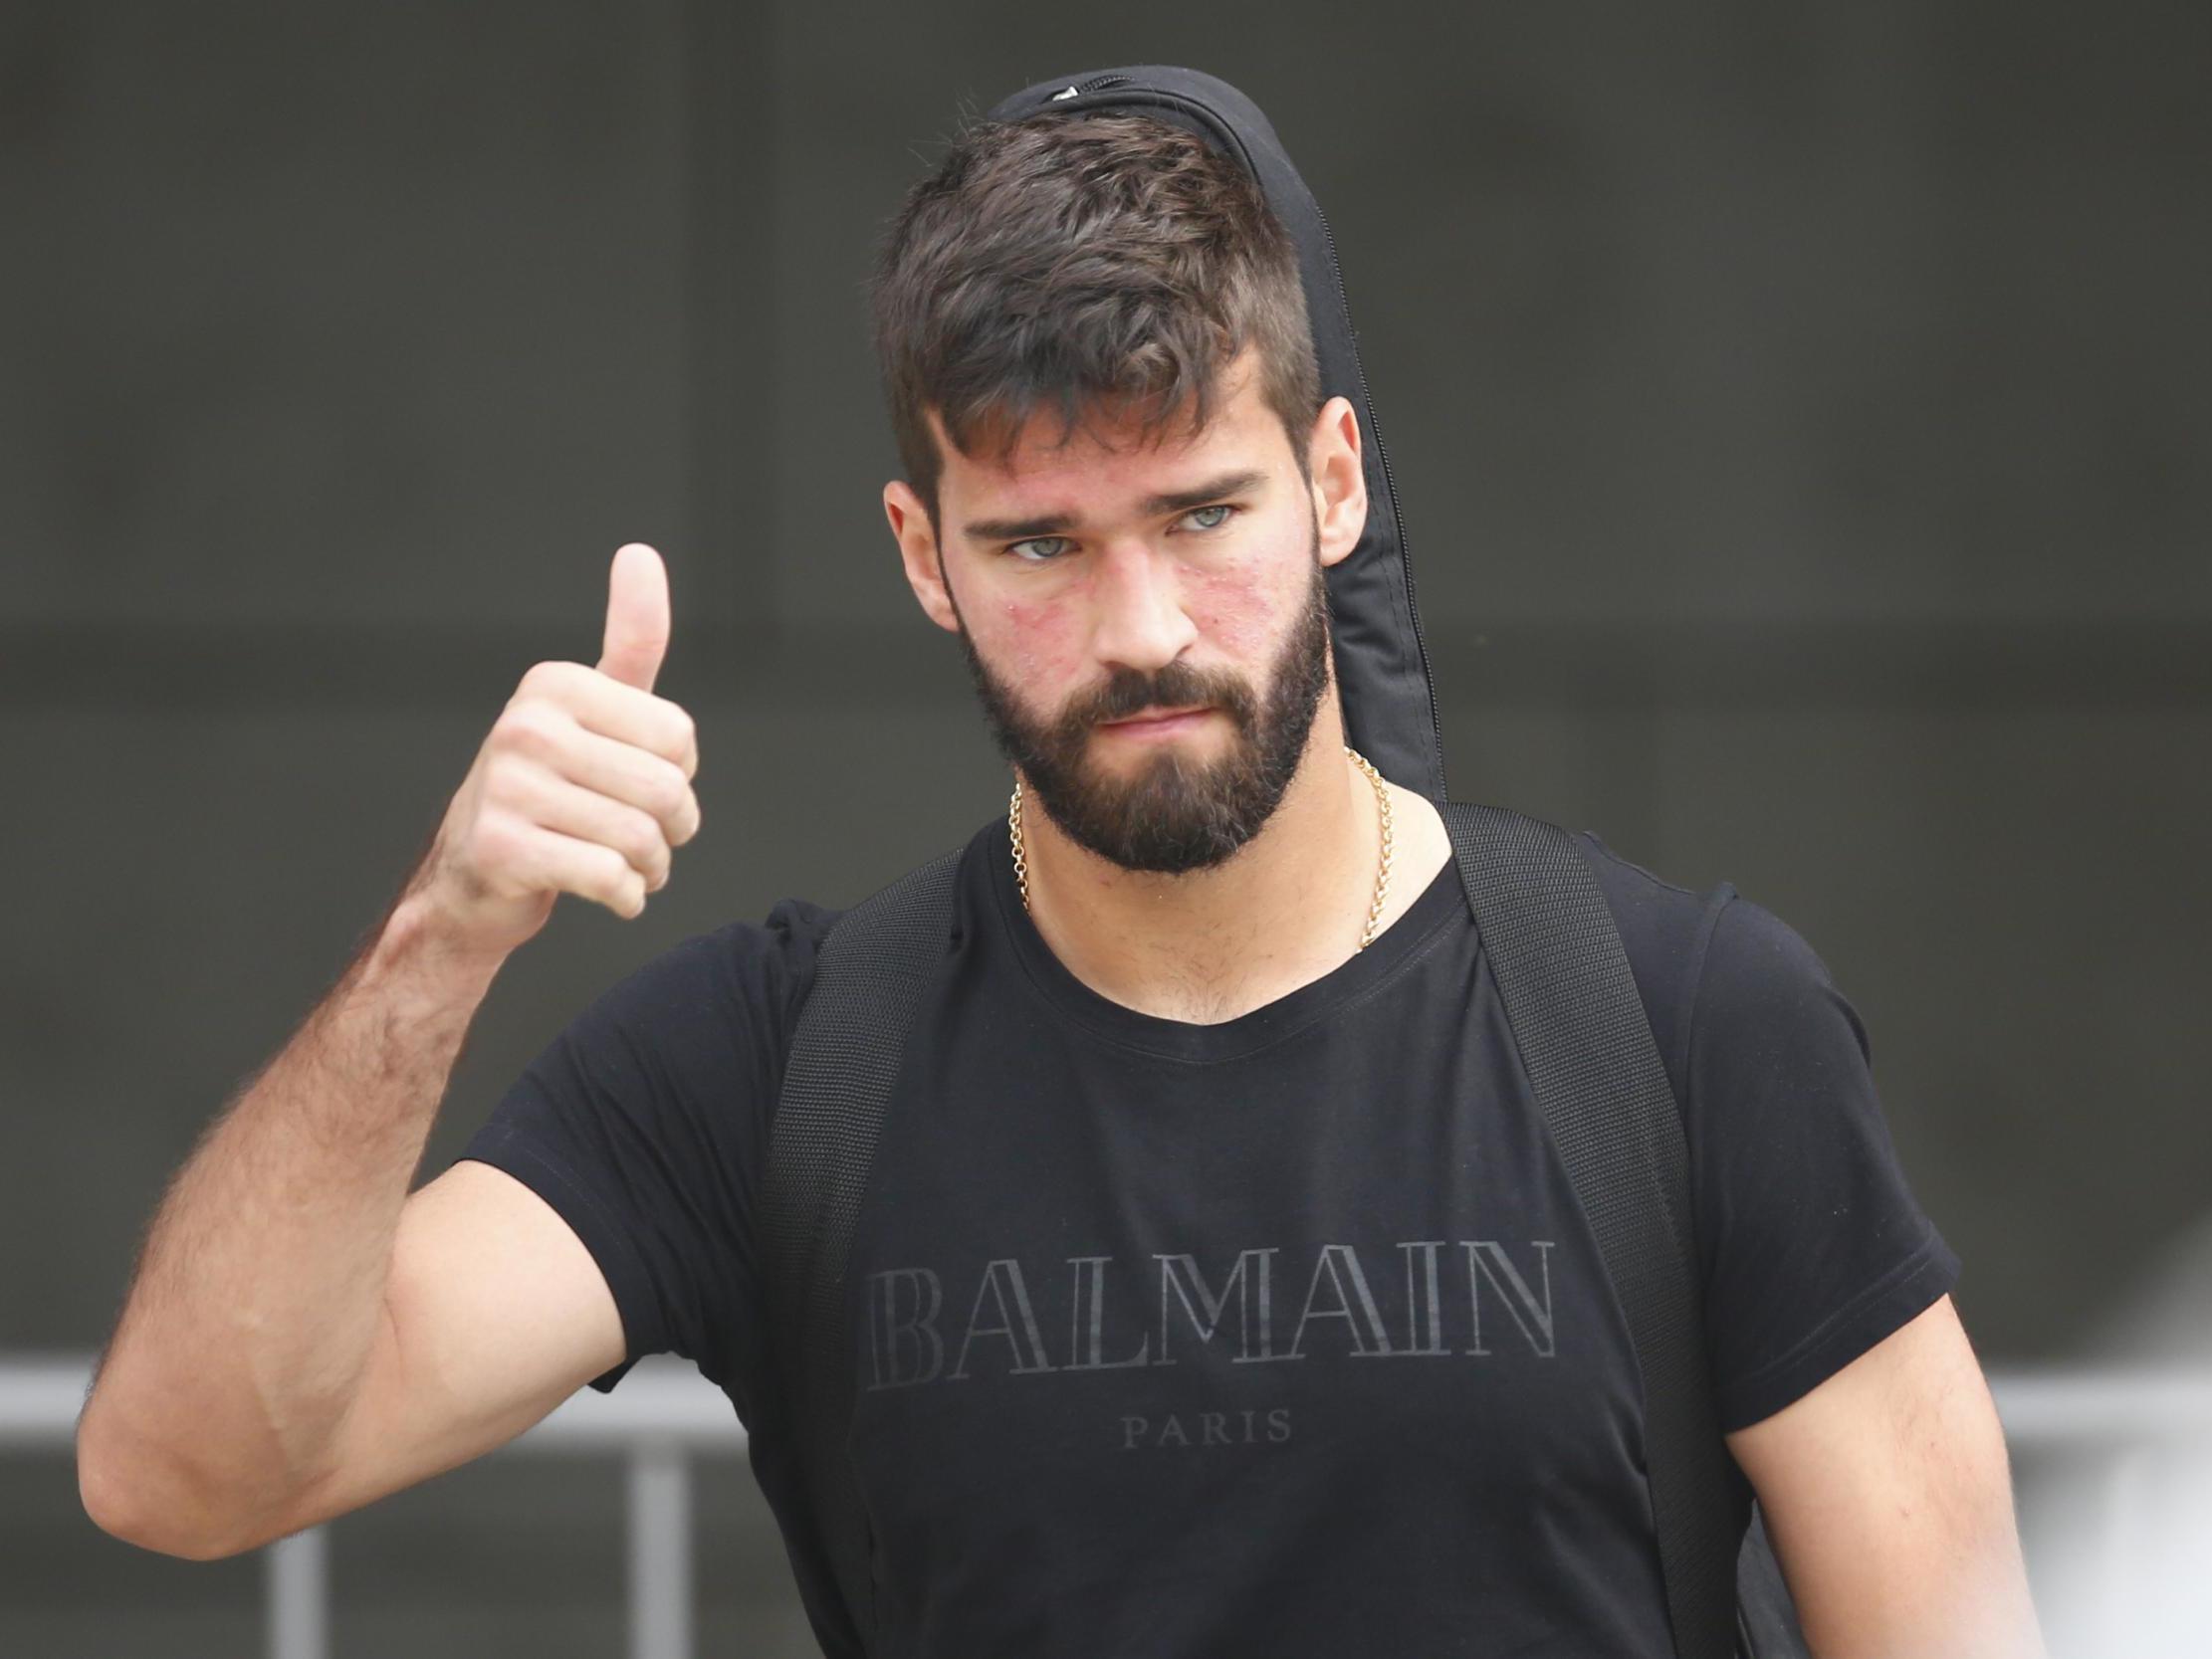 Transfer news, rumours - LIVE: Liverpool to confirm Alisson, Manchester United set for spending spree plus Arsenal, Chelsea and Spurs latest